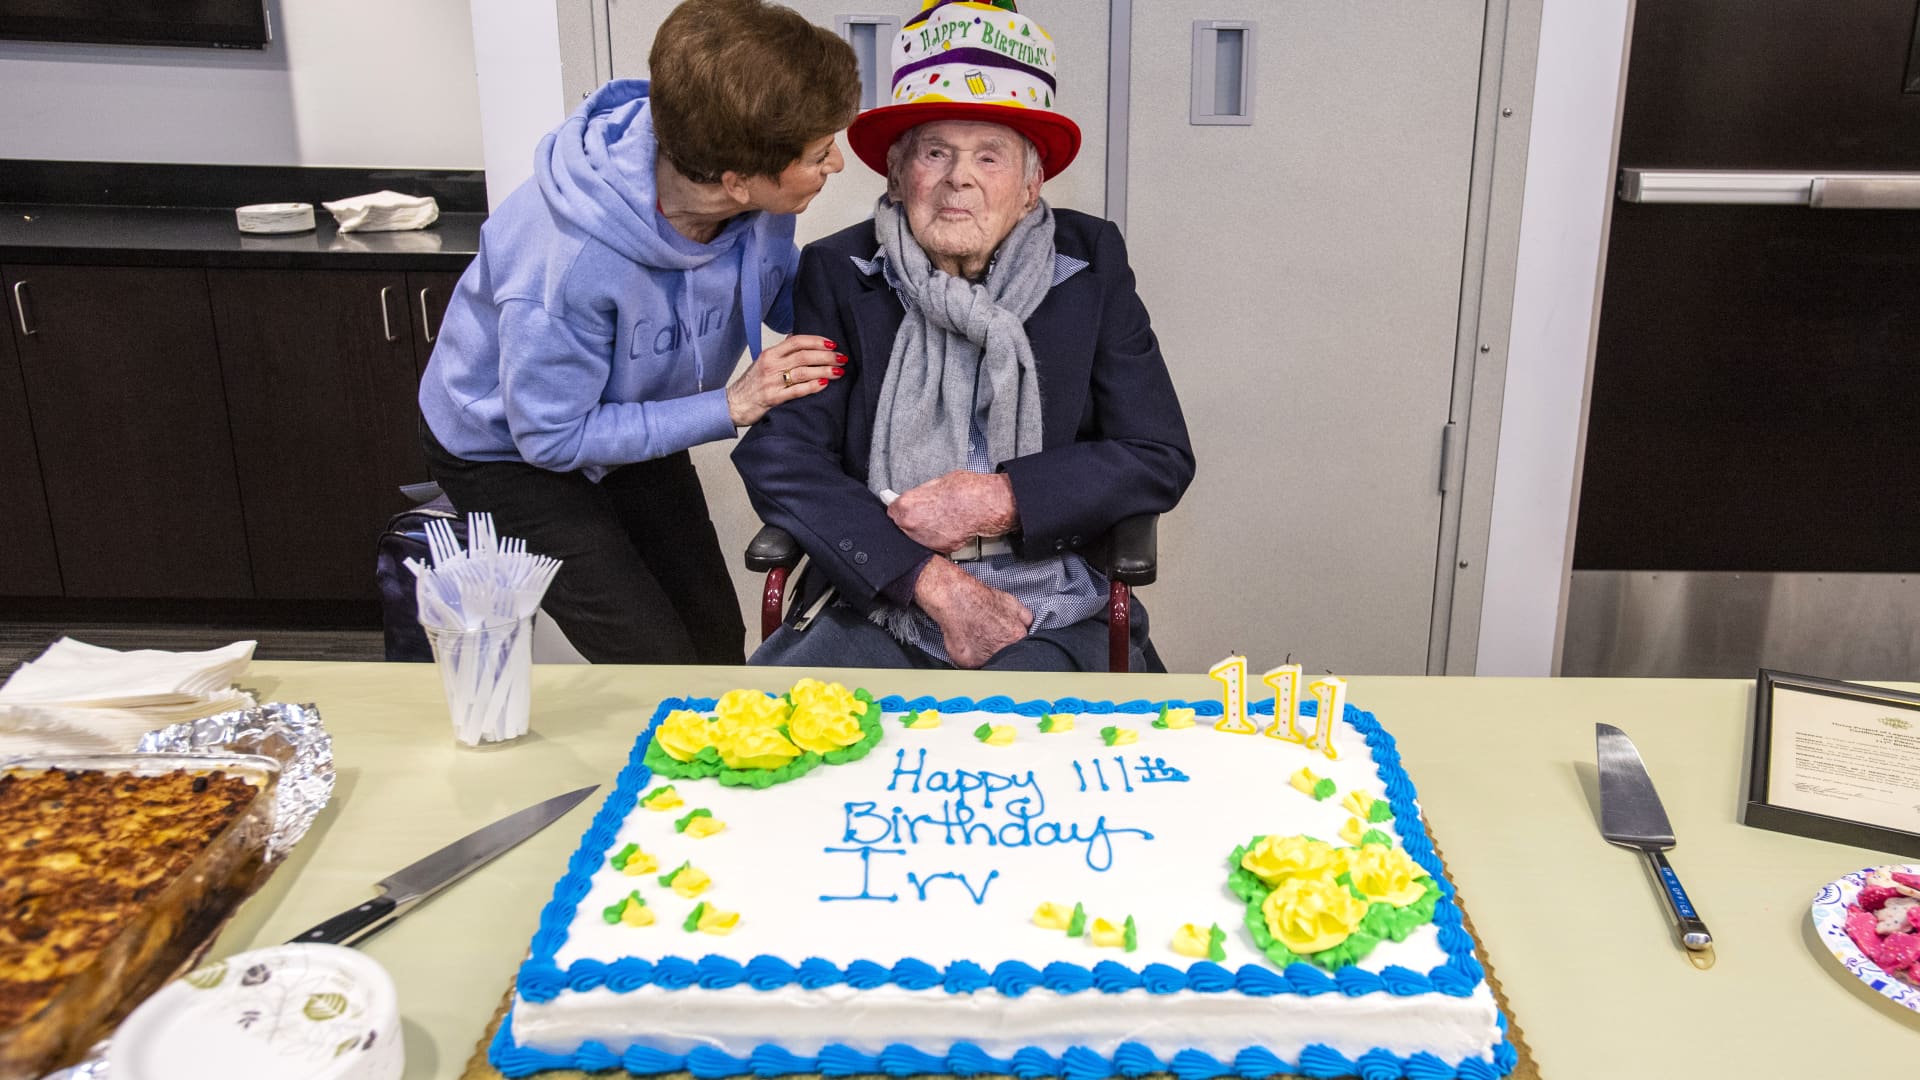 Irving Piken during his 111th birthday celebration at the Laguna Woods Community Center in California on Dec. 20, 2019. Piken, who passed away in February 2020, was believed to be the oldest man living in the U.S. 